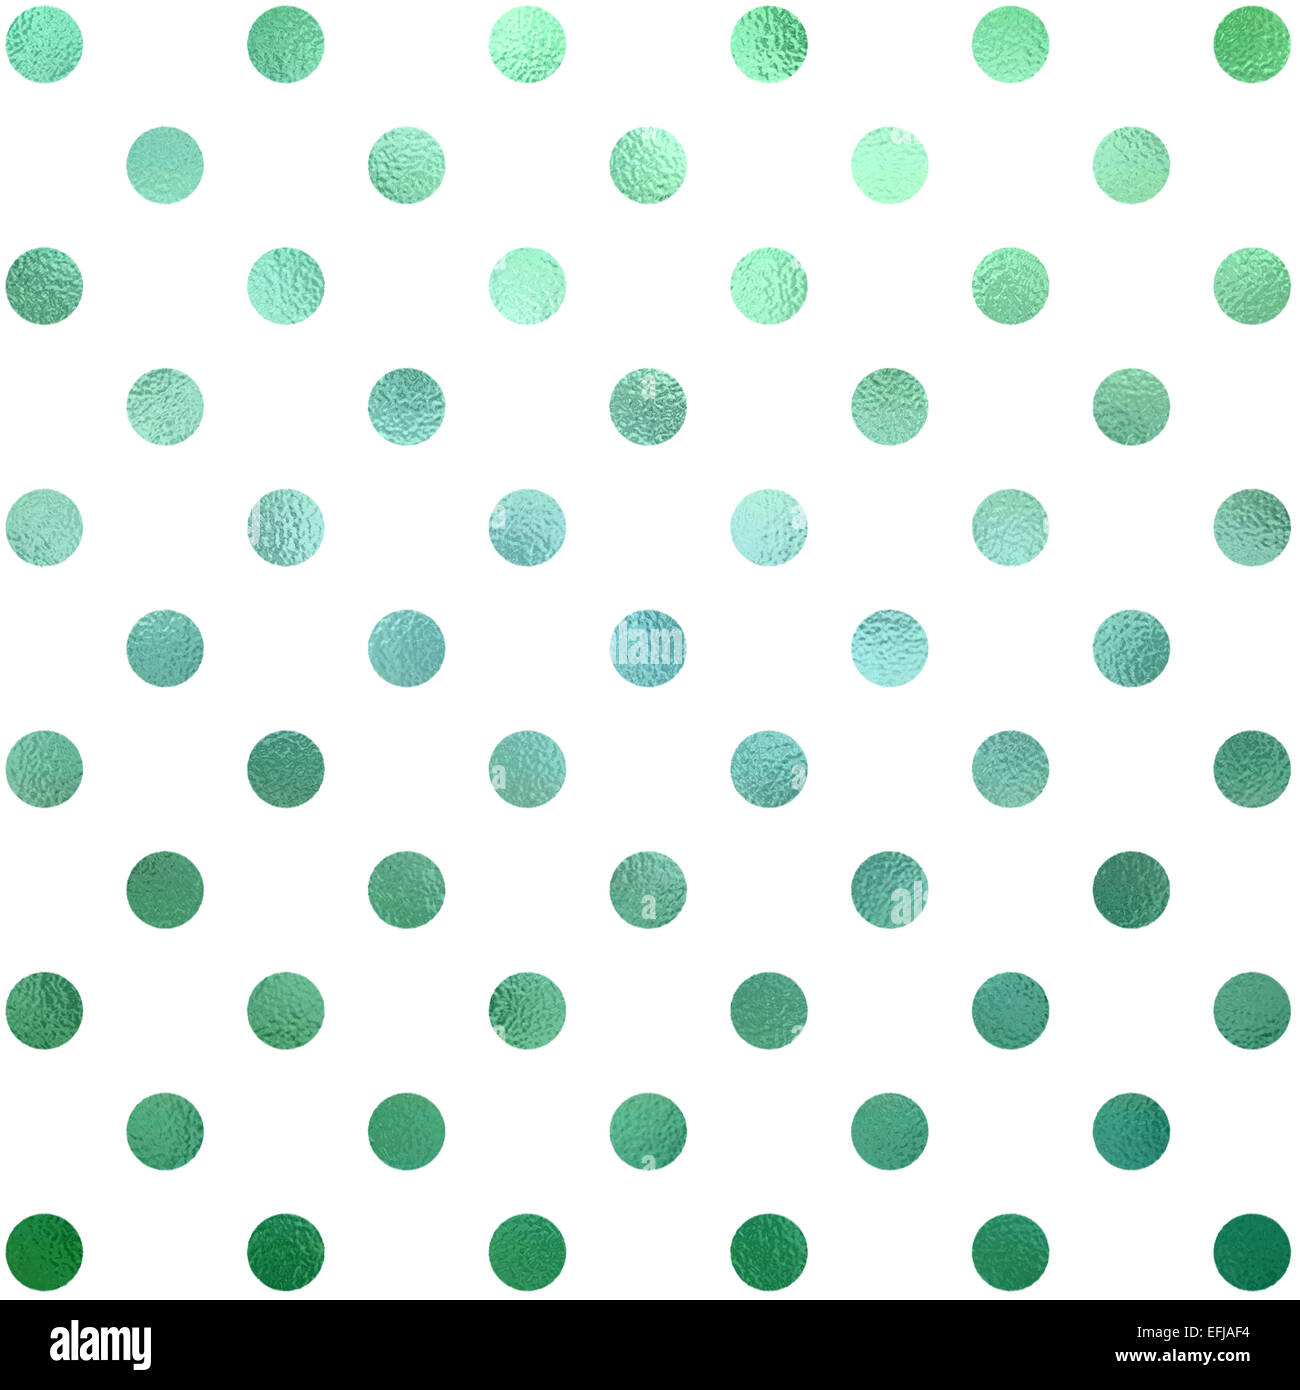 Green polka dots background Stock Illustration by ©pixelliebe